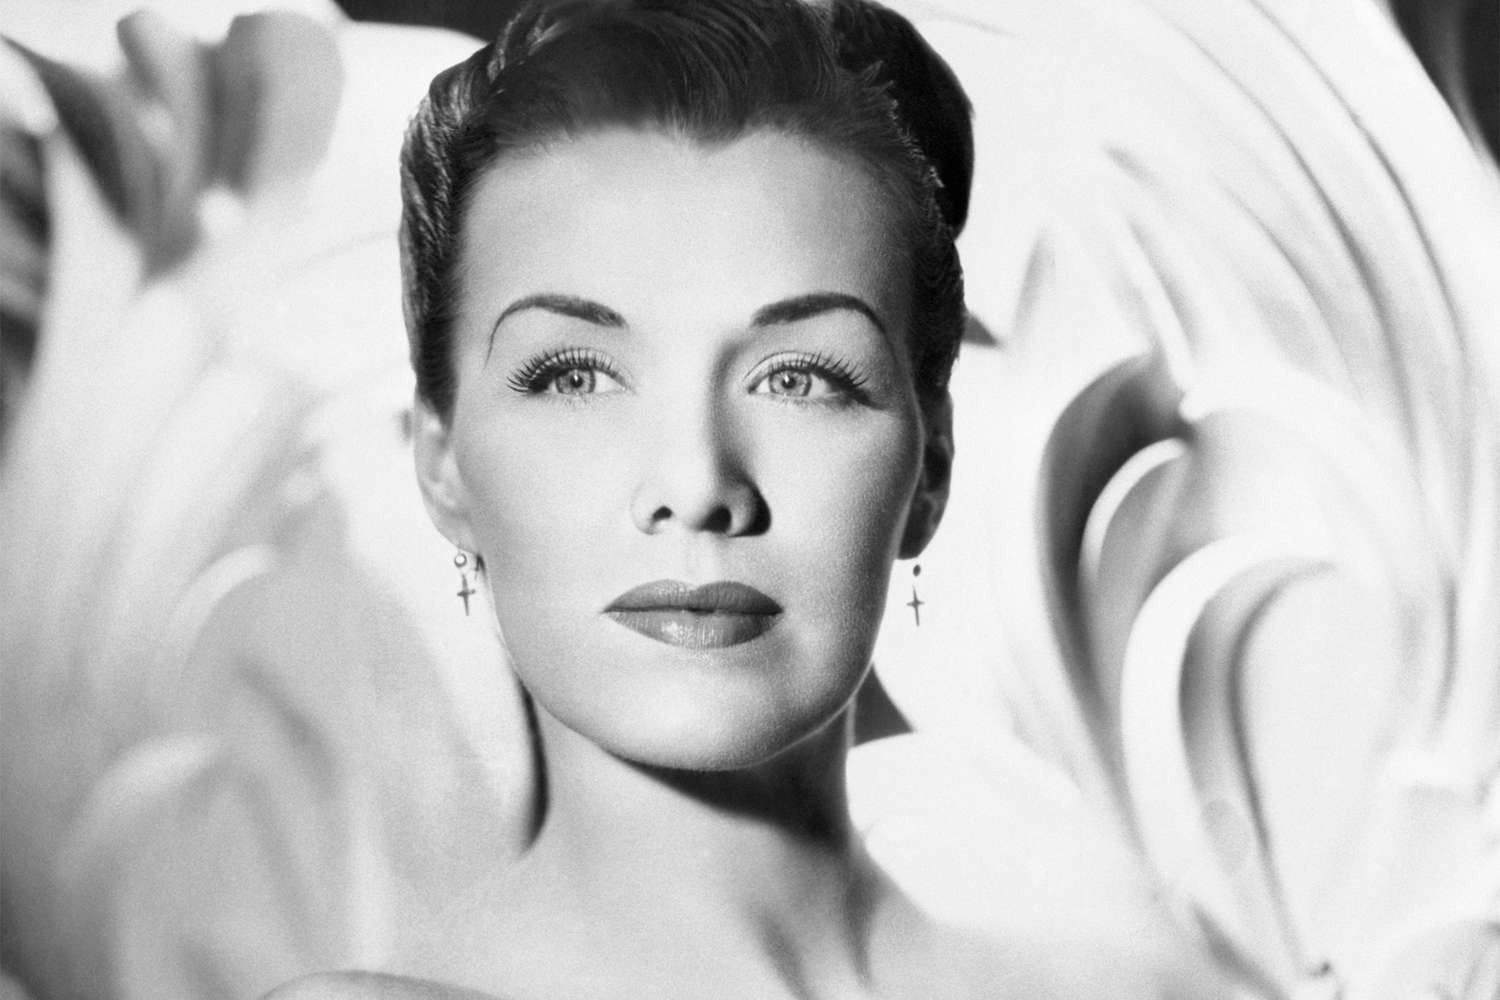 In the late '40s, actress Jean Spangler, poised for stardom, vanished after mentioning a meeting with her ex-husband and a night shoot. Her purse, found in a park, contained a note suggesting an abortion plan. Despite Kirk Douglas denying involvement, suspicions lingered, fueling speculation about her mysterious disappearance.